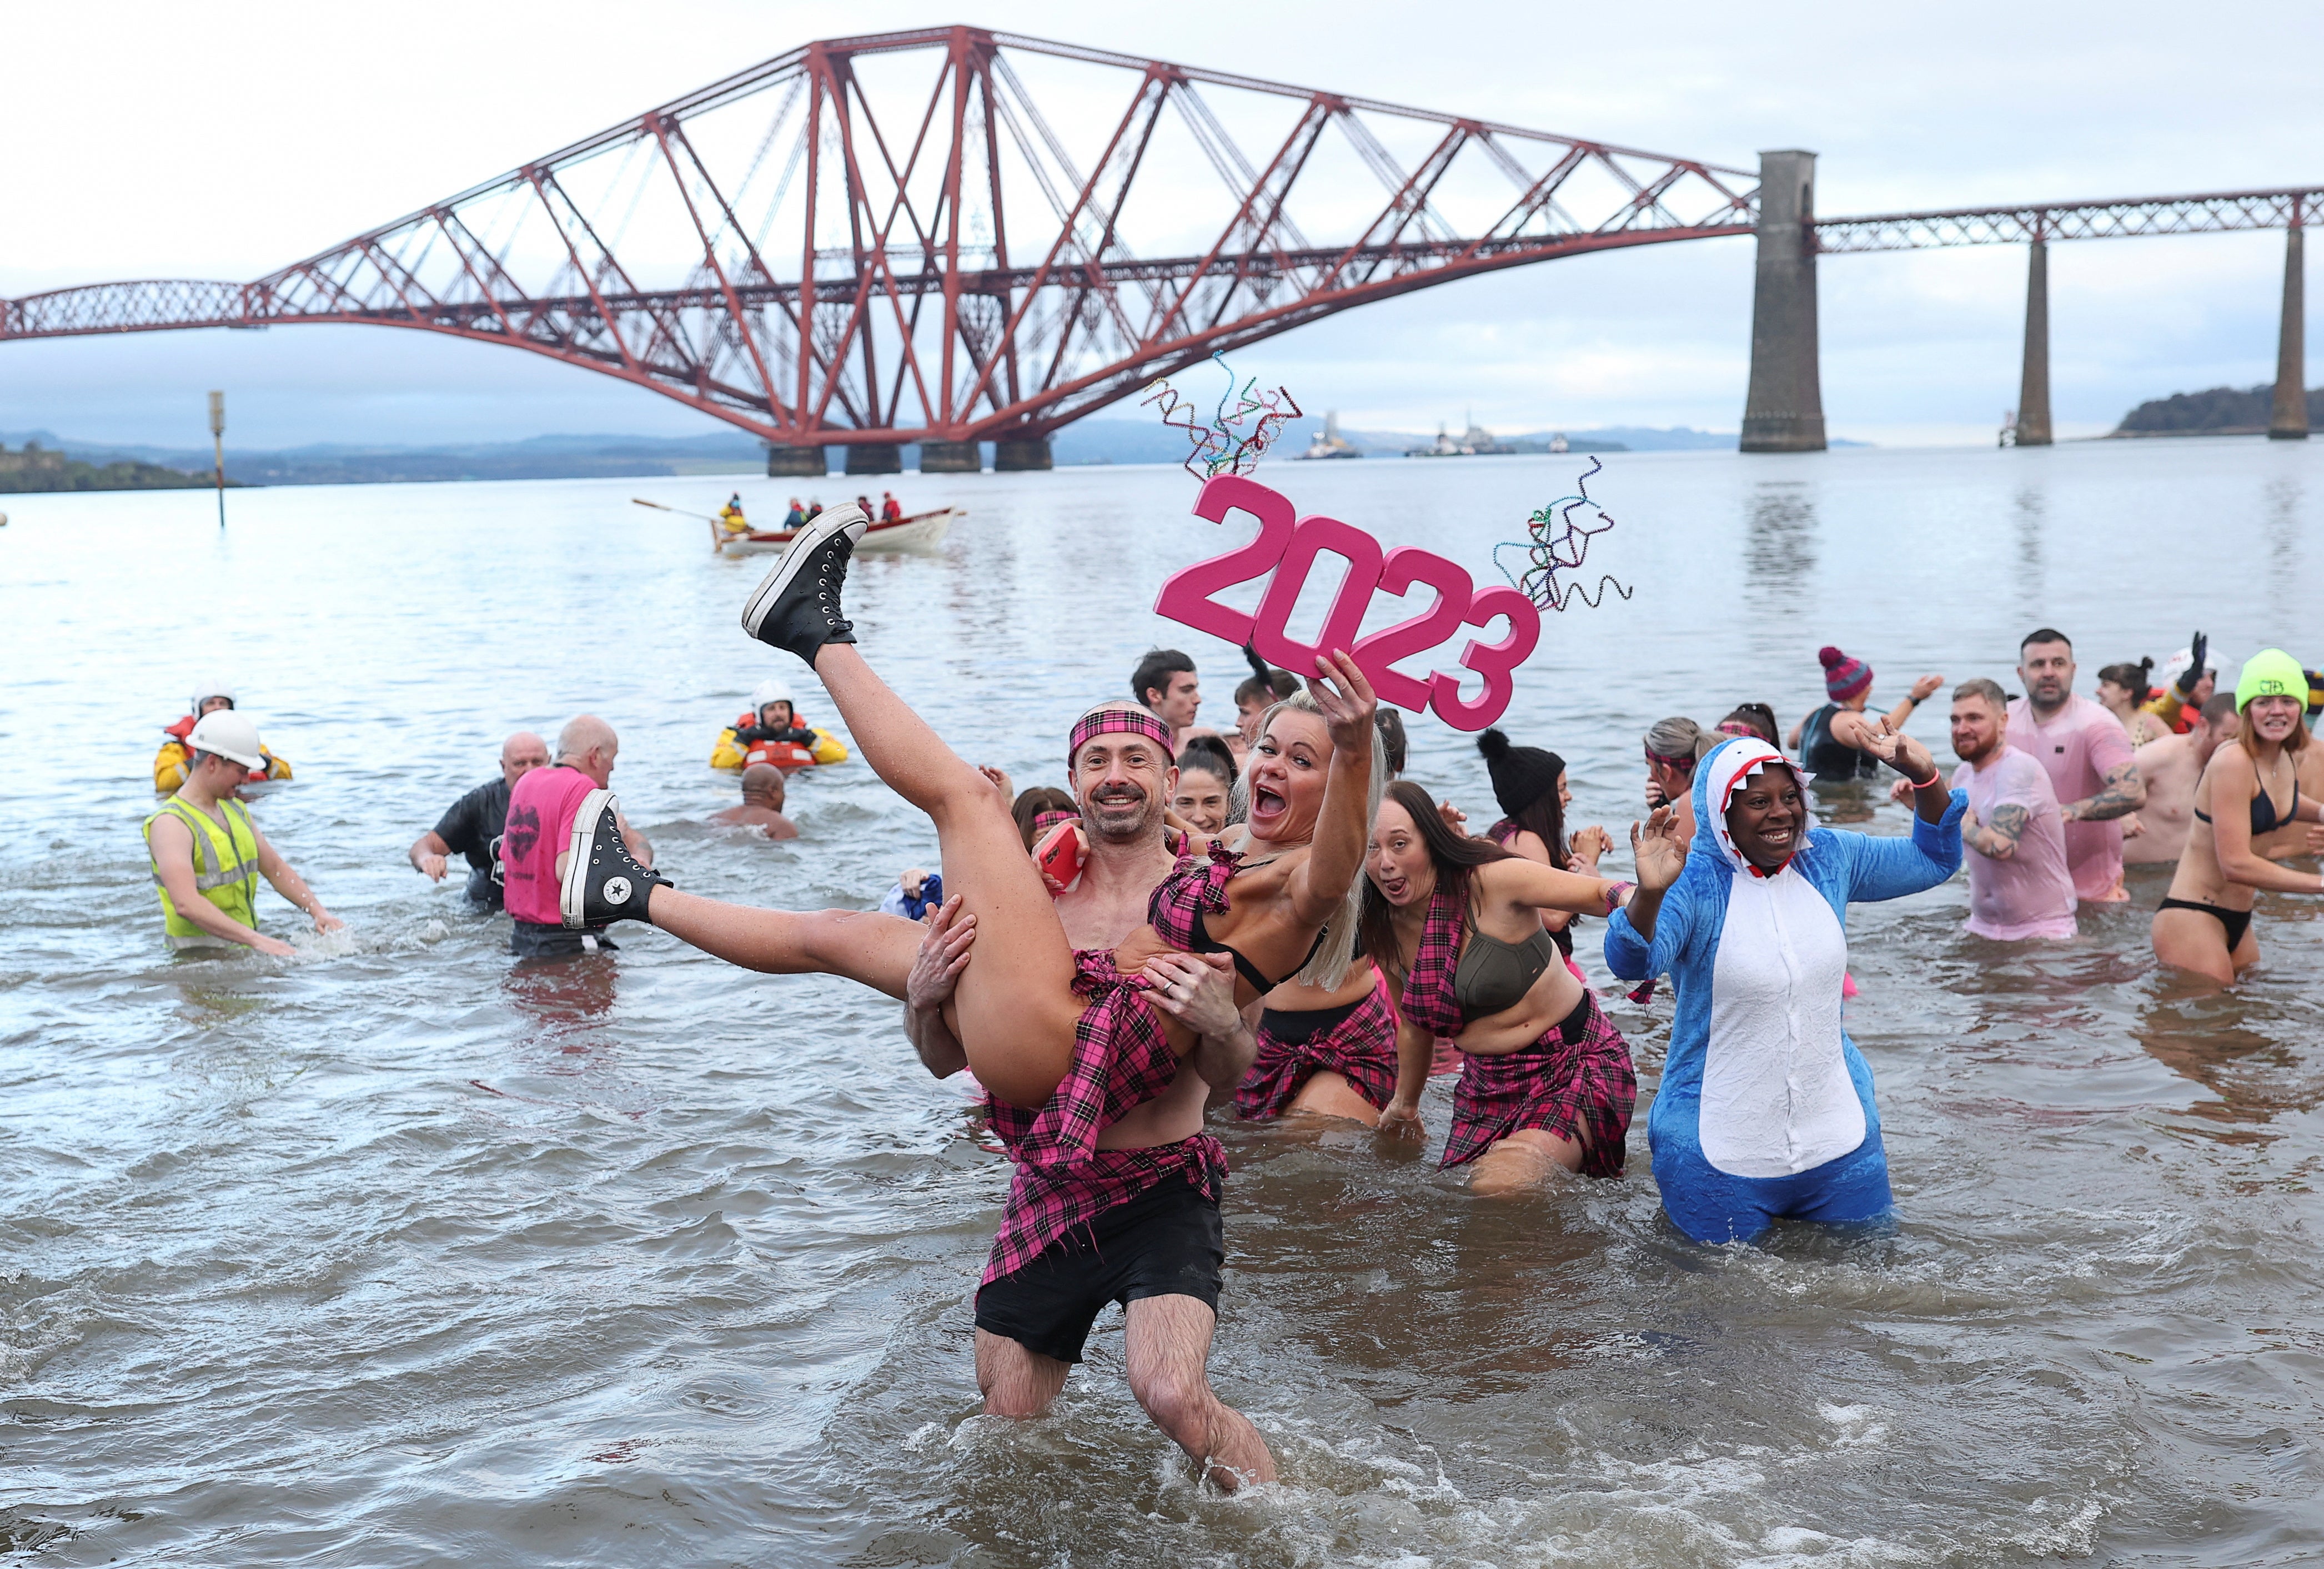 Revellers participate in a New Year’s Day swim, locally referred to as a ‘loony dook’, at South Queensferry in Scotland